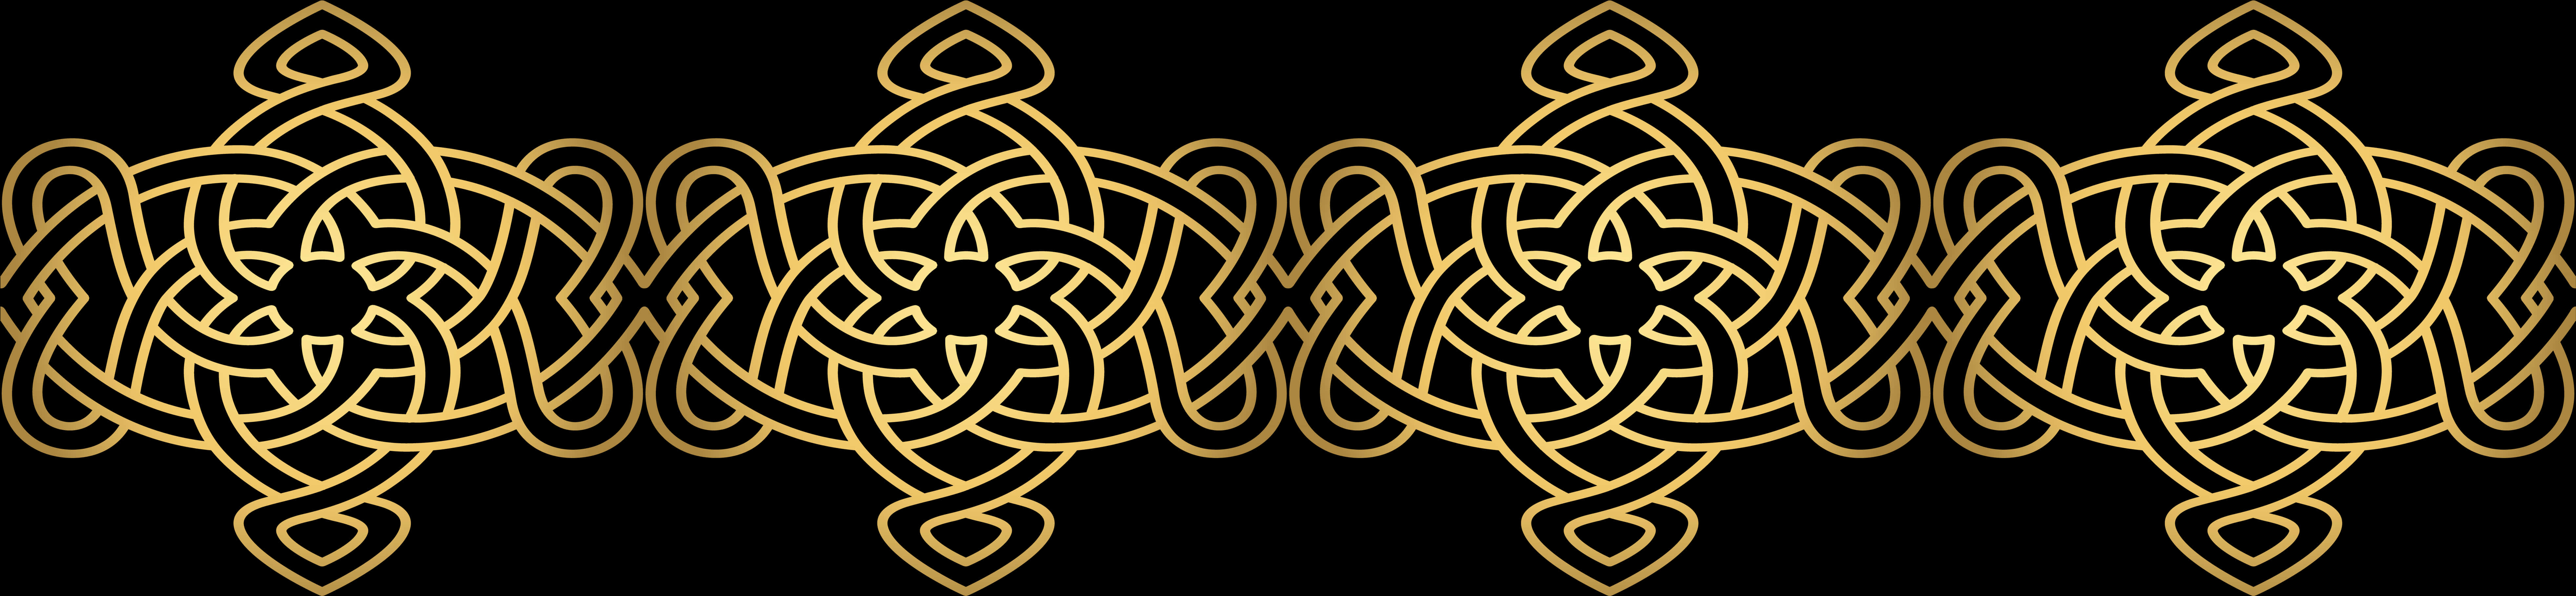 A Black And Gold Design